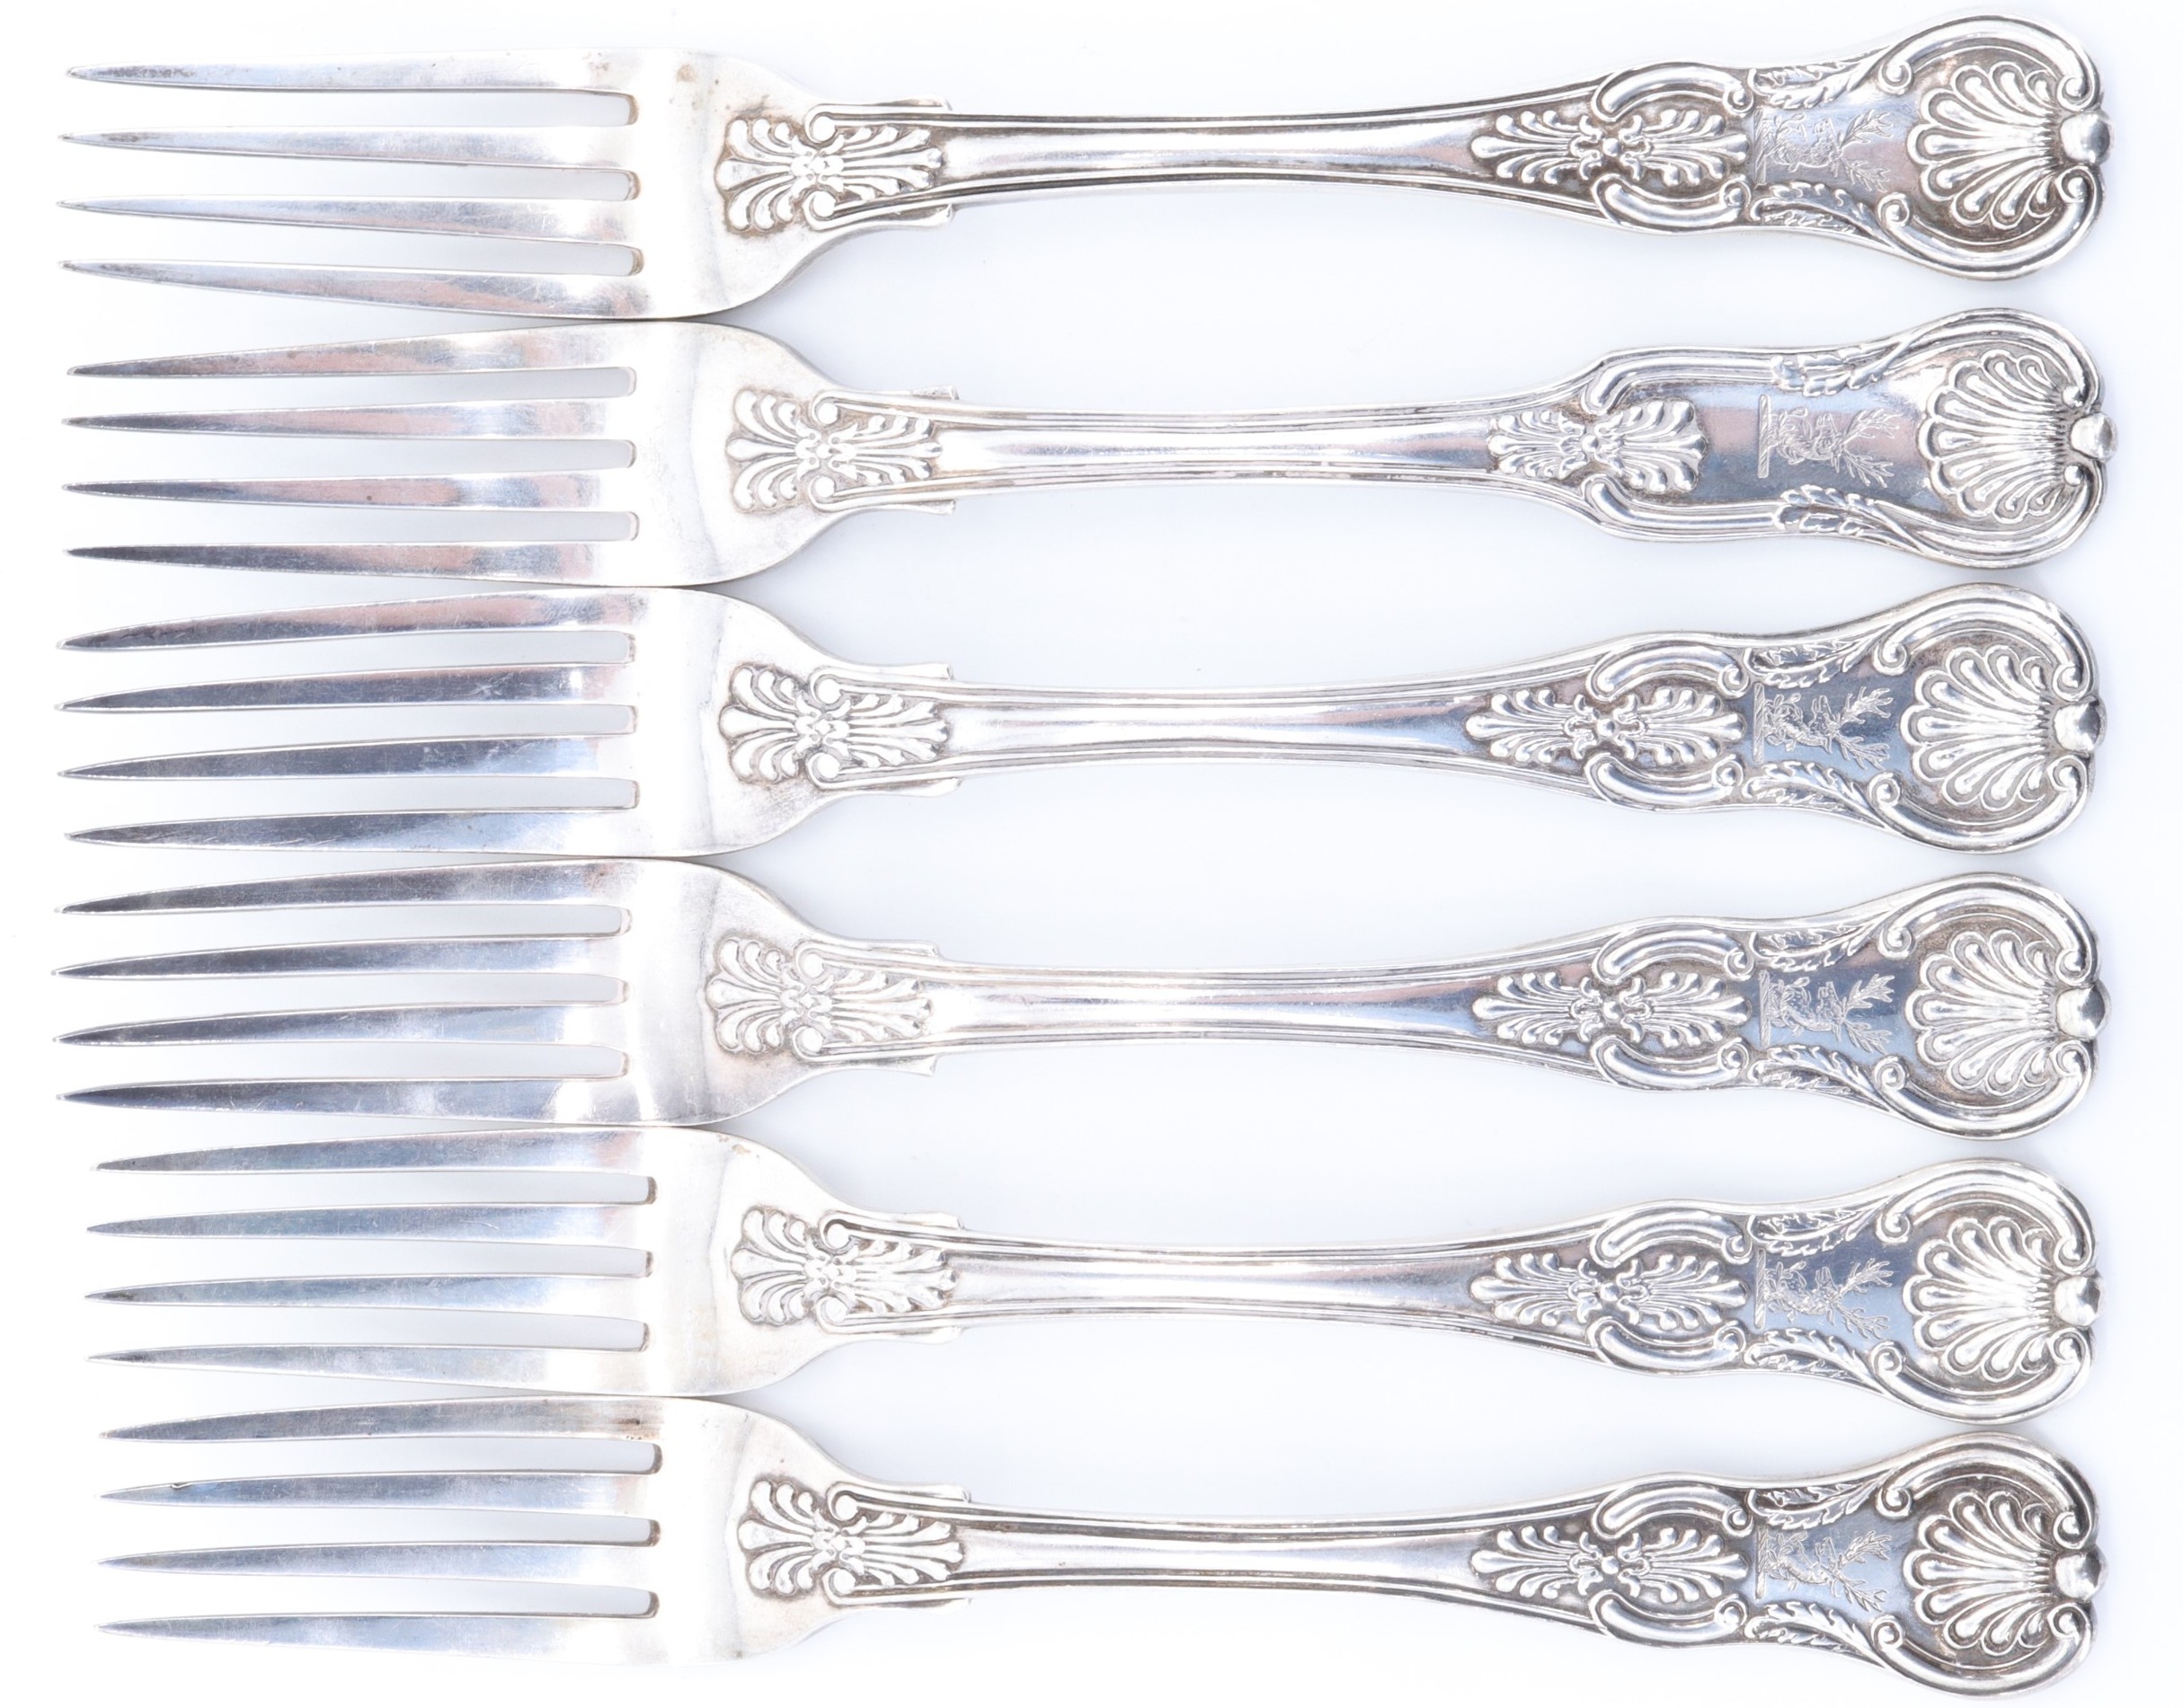 A set of five late Georgian silver Queen's pattern table forks, W E, London, 1824, together with